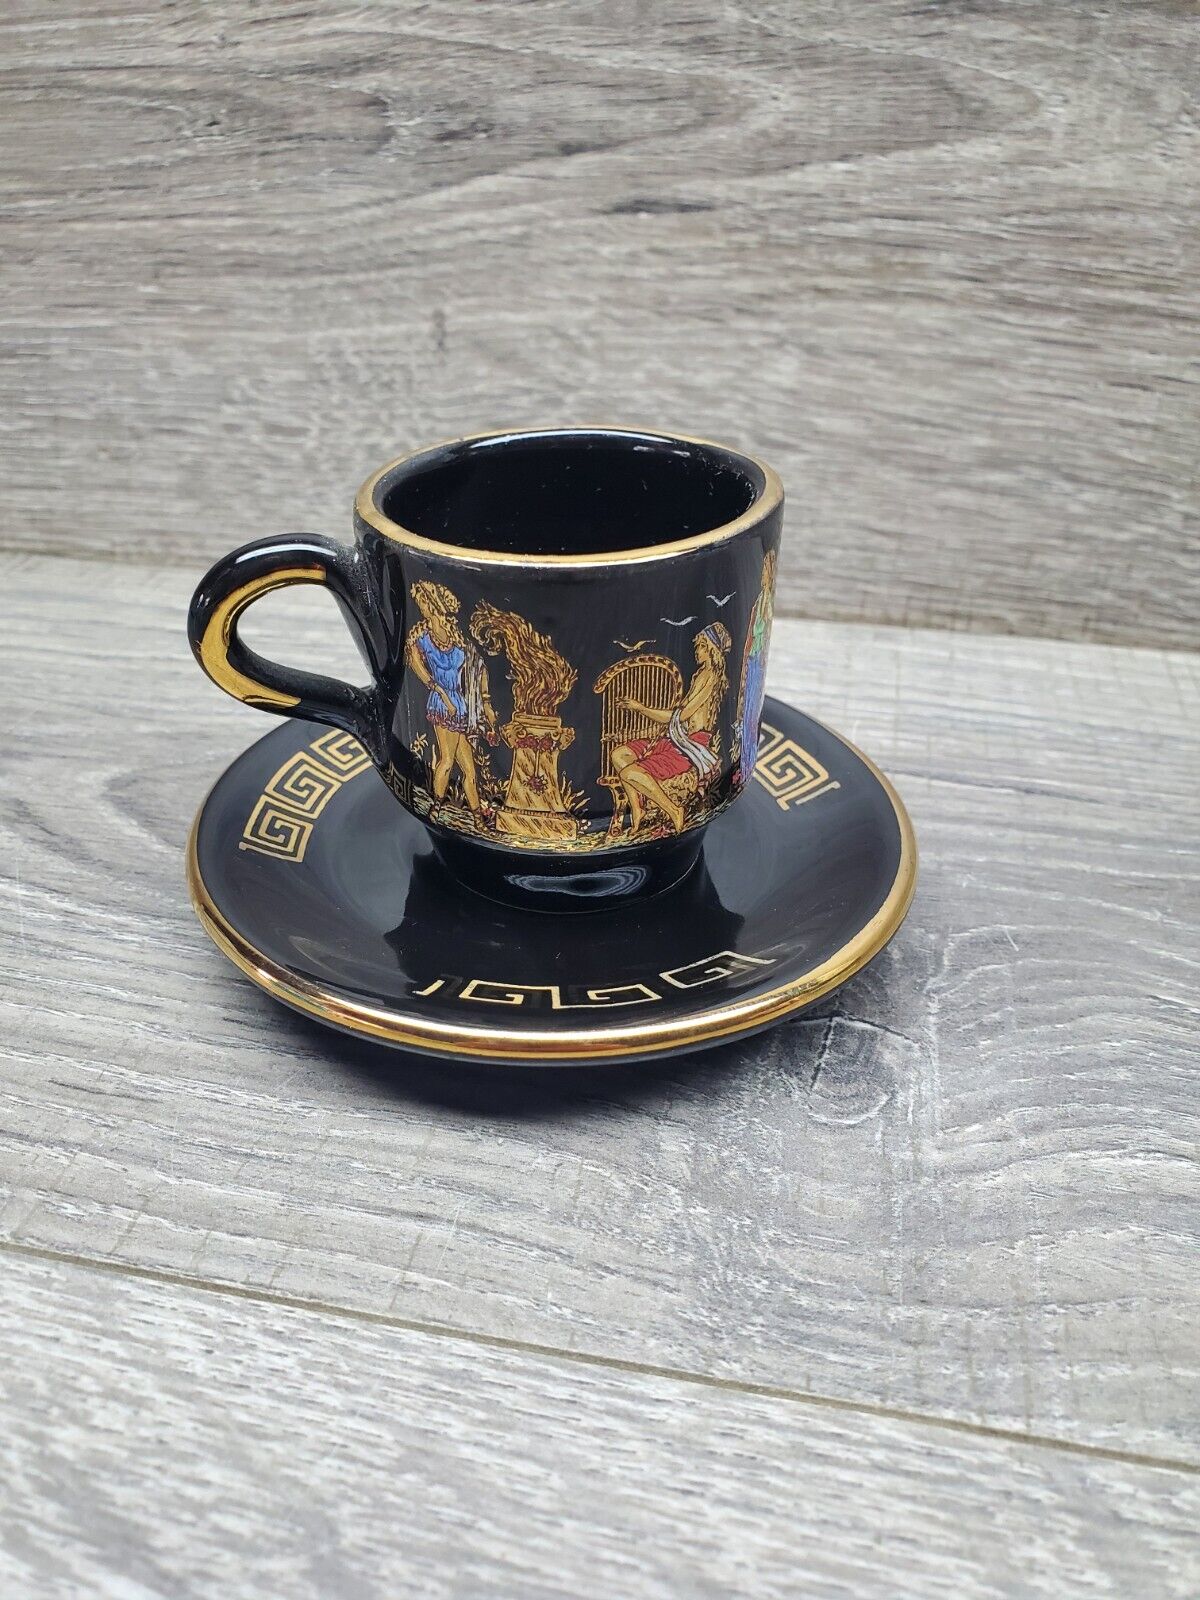 Vtg Olvmpia Hand Made In Greece 24K Tea Cup & Saucer